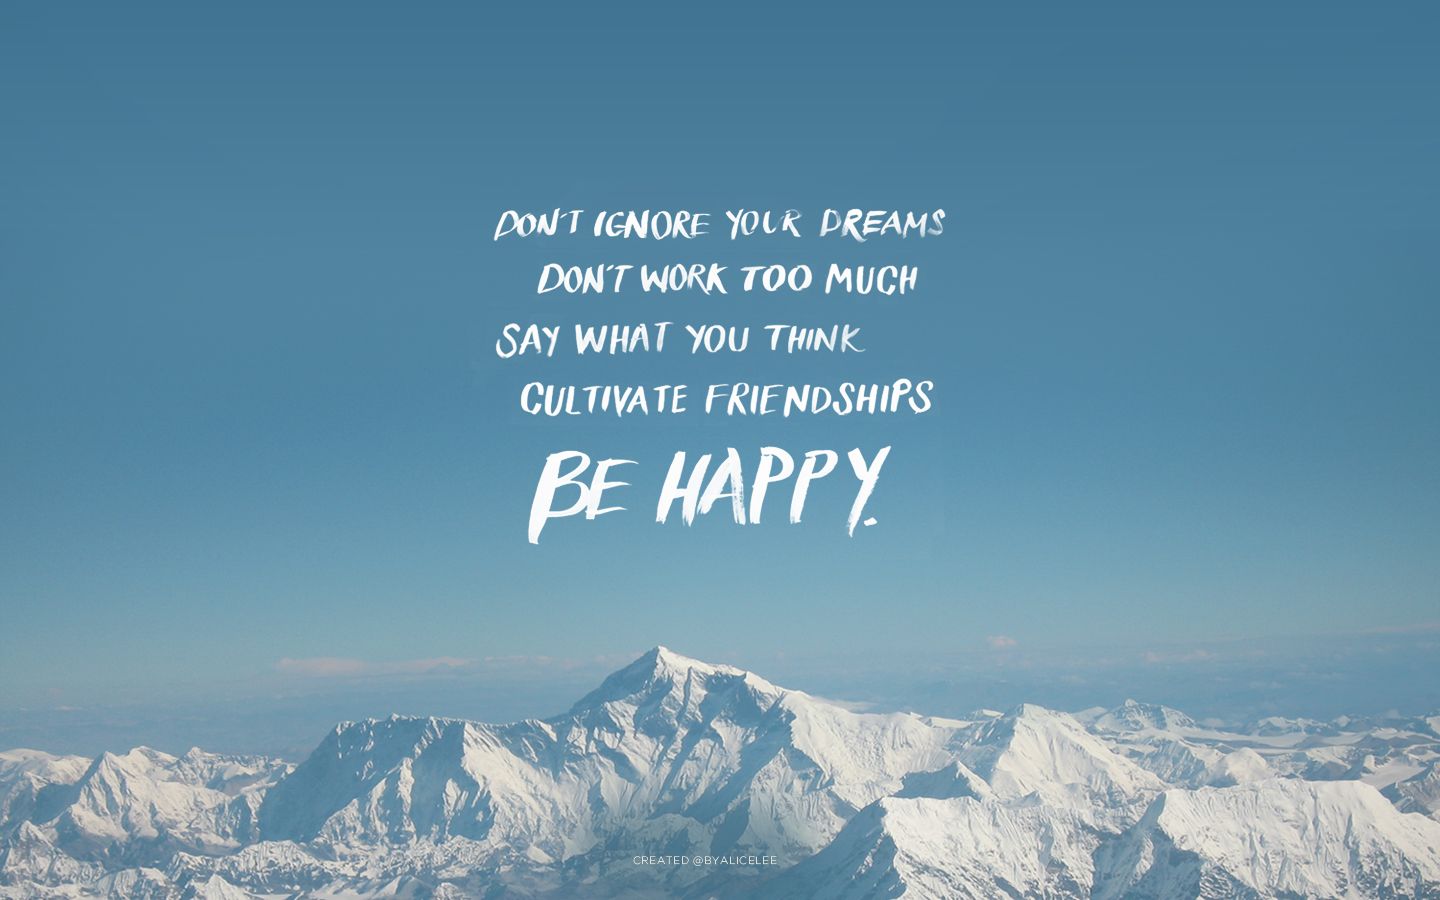 Dream Quote Wallpaper High Quality Free Download > SubWallpaper